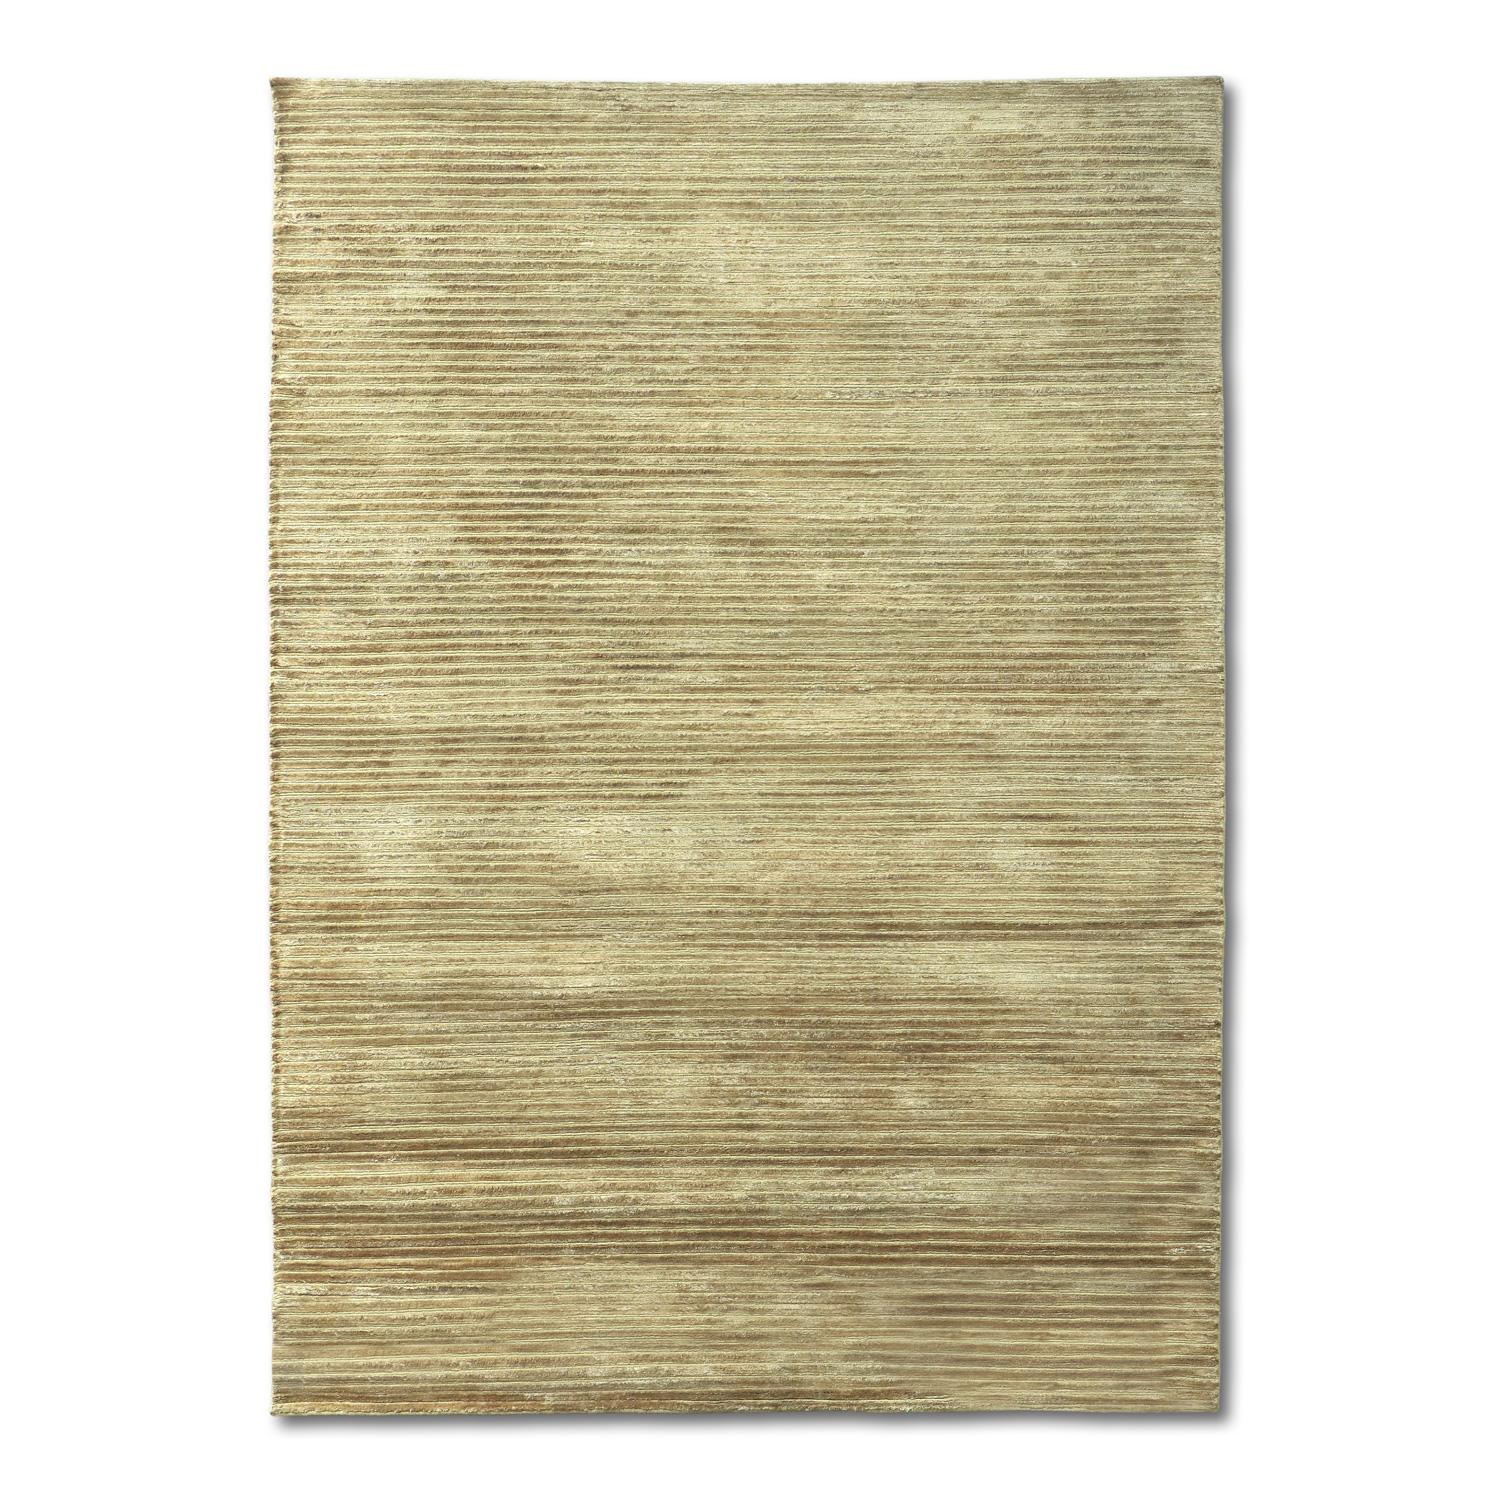 21st Cent Striped Gold Hues Nepal Wool Viscose Rug In Stock 170x240cm